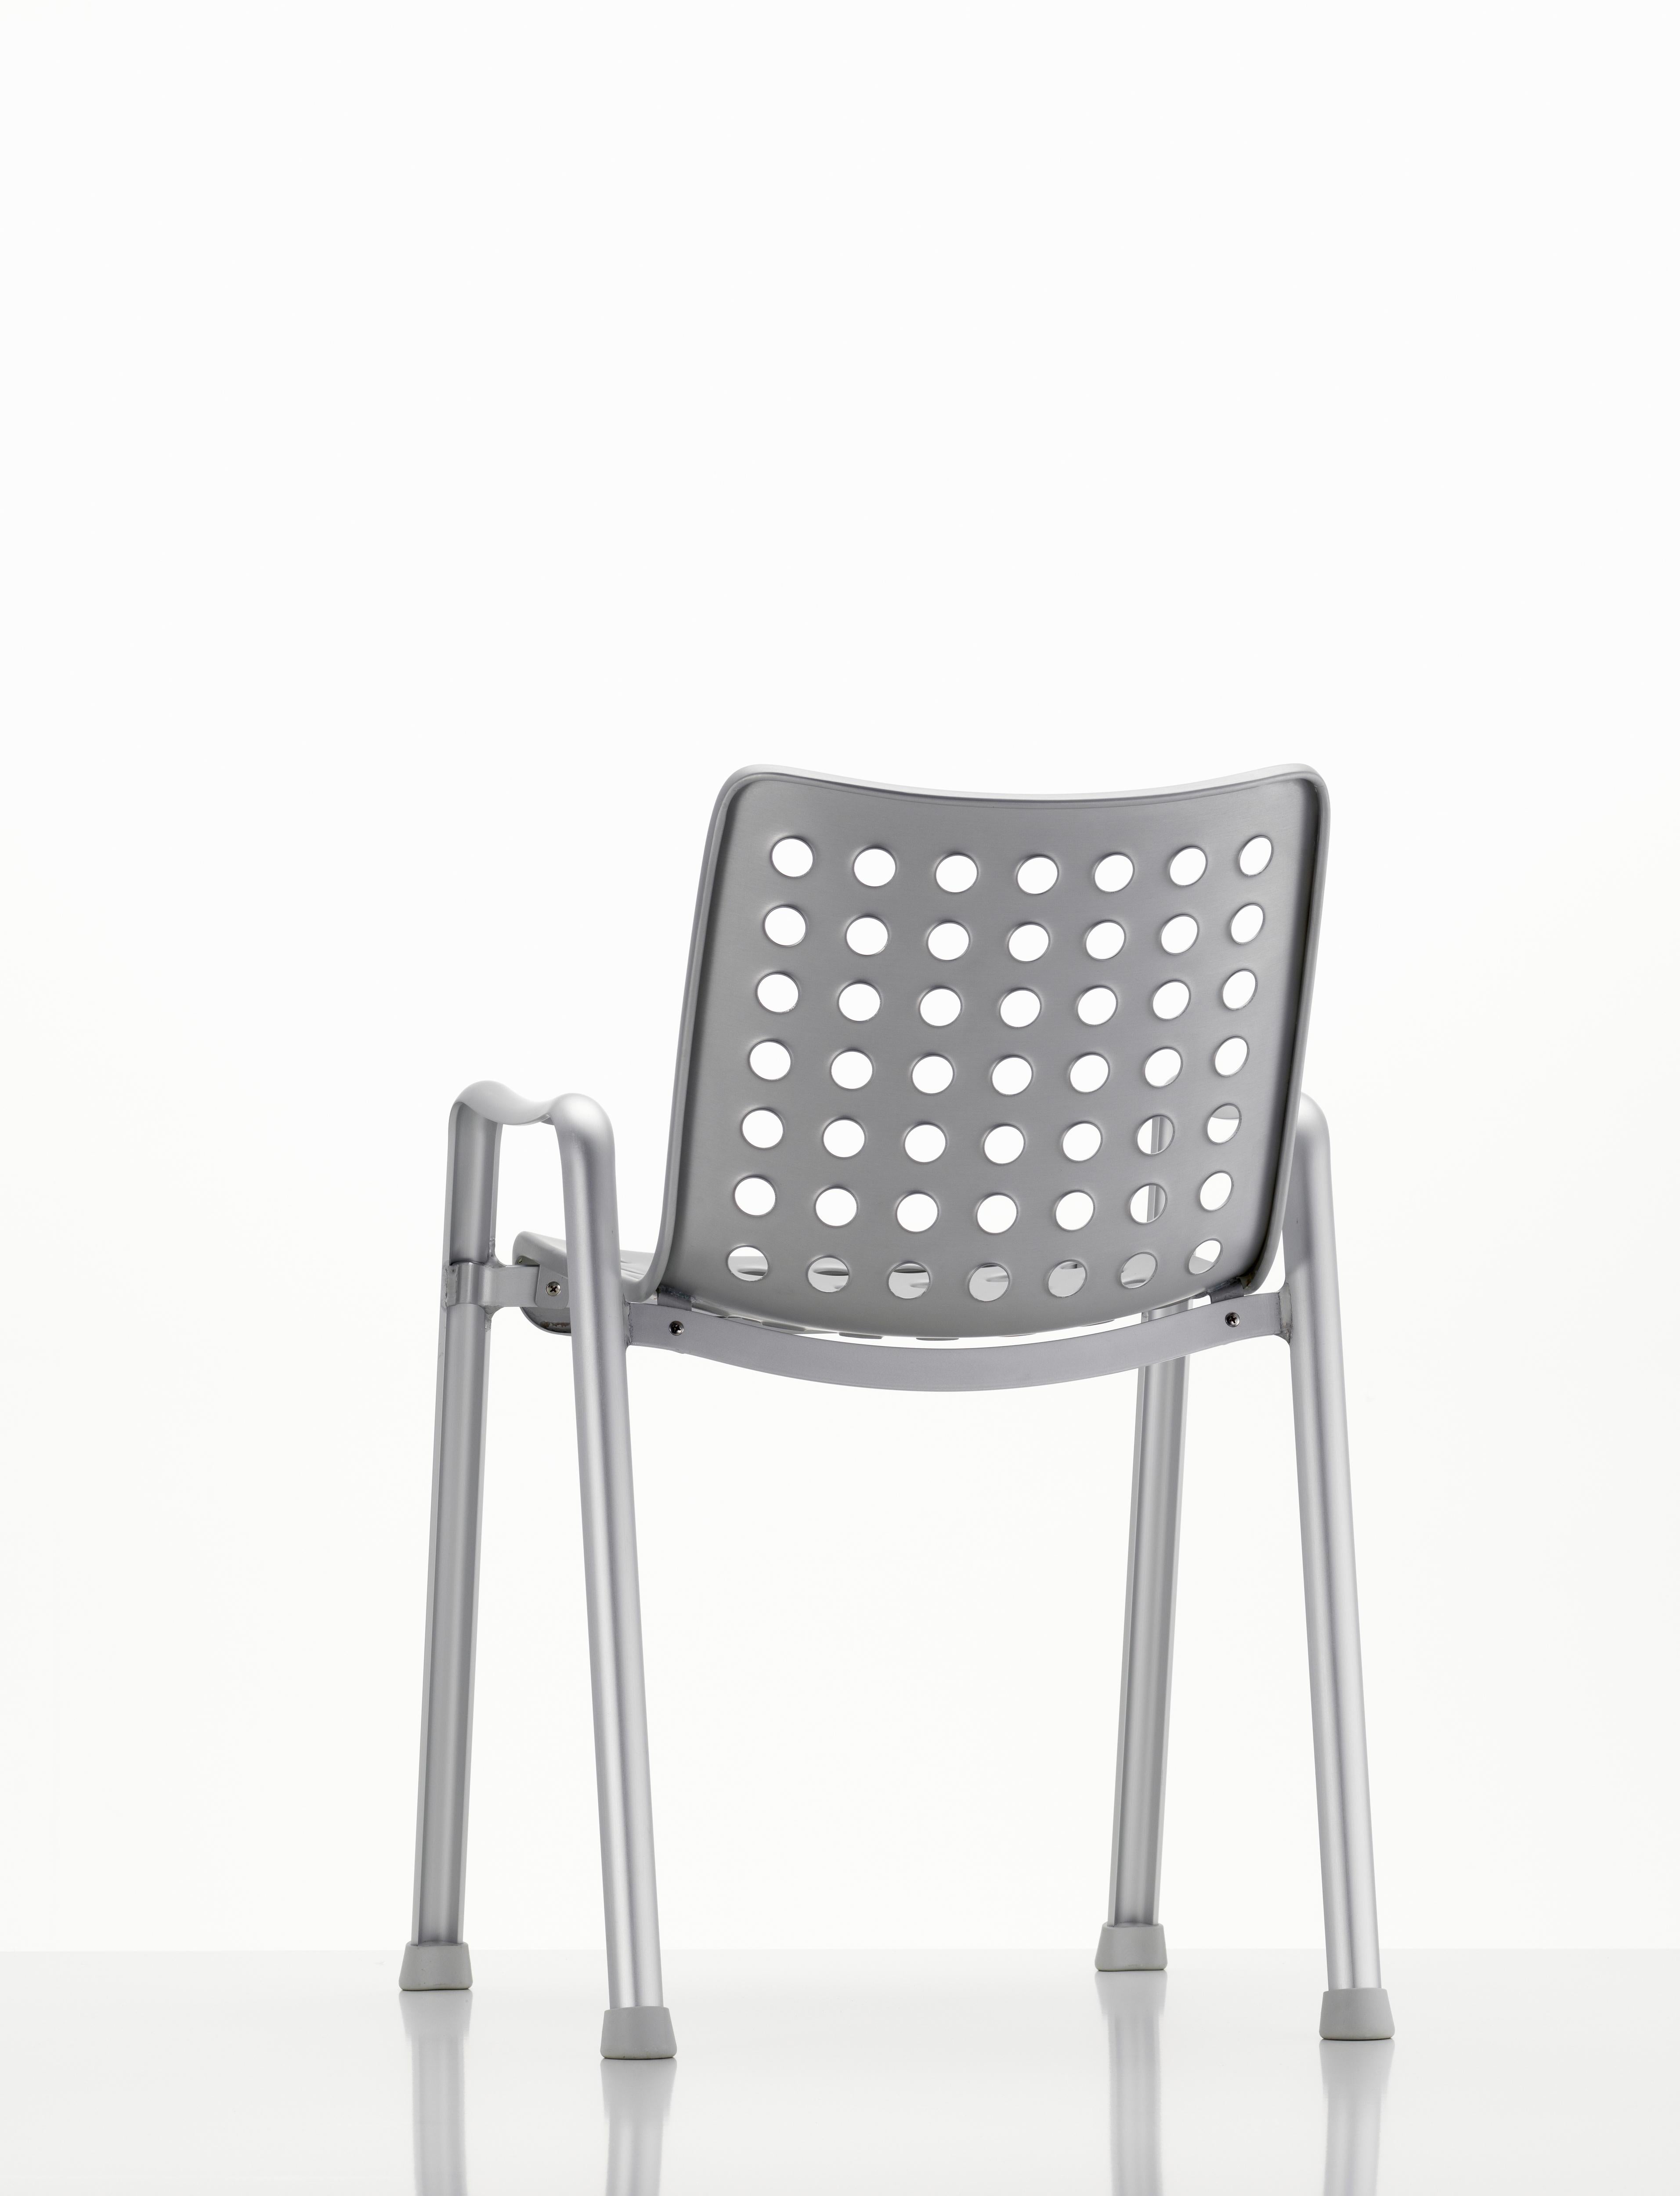 Swiss Vitra Landi Chair in Matte Anodized Aluminum by Hans Coray For Sale